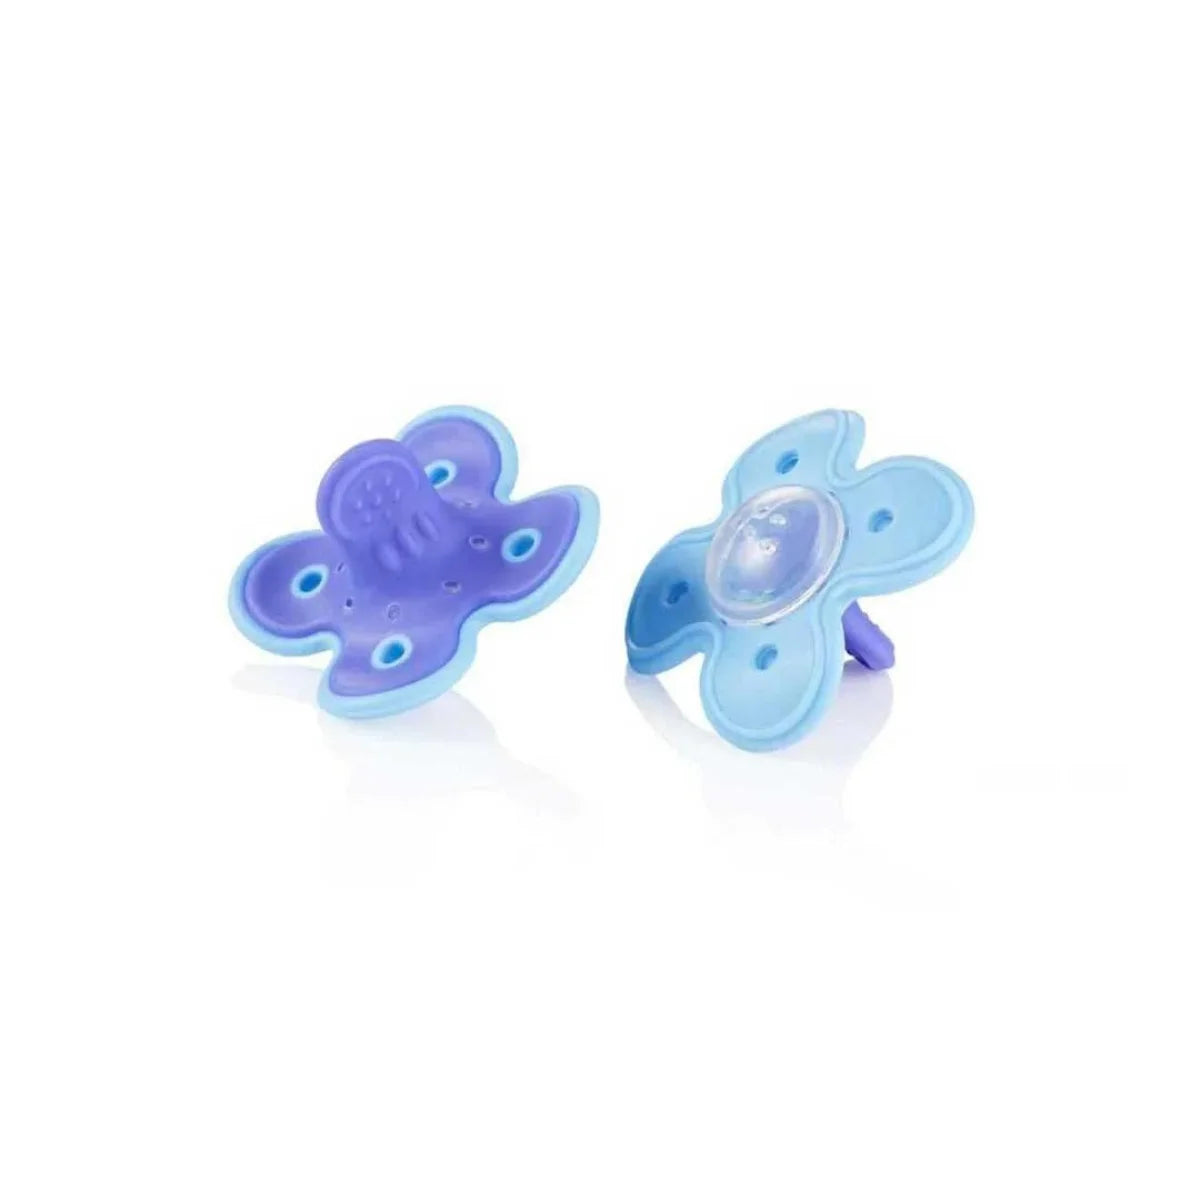 2 pack of purple and blue molar munch baby teethers for babies